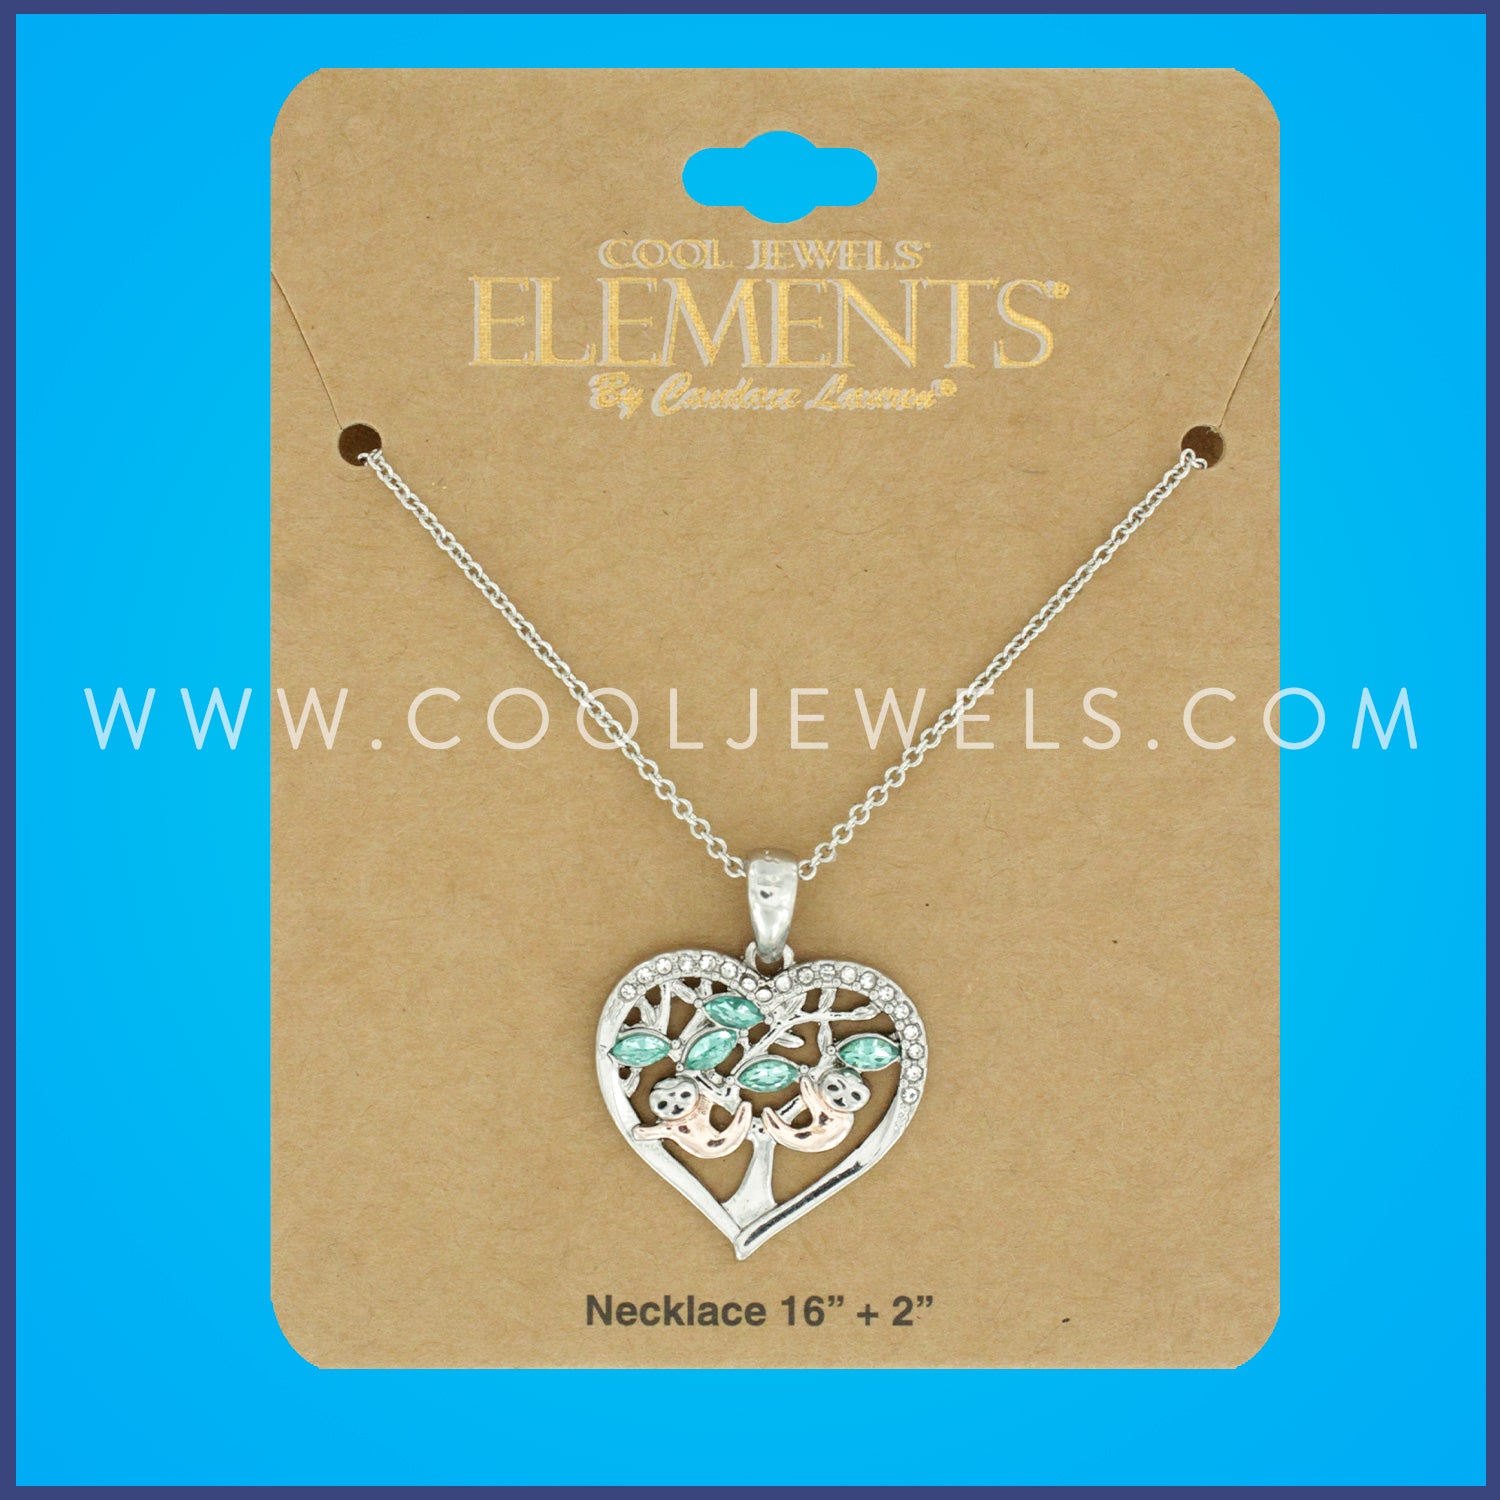 LINK CHAIN NECKLACE WITH HEART-SHAPED TREE PENDANT WITH SLOTHS - CARDED